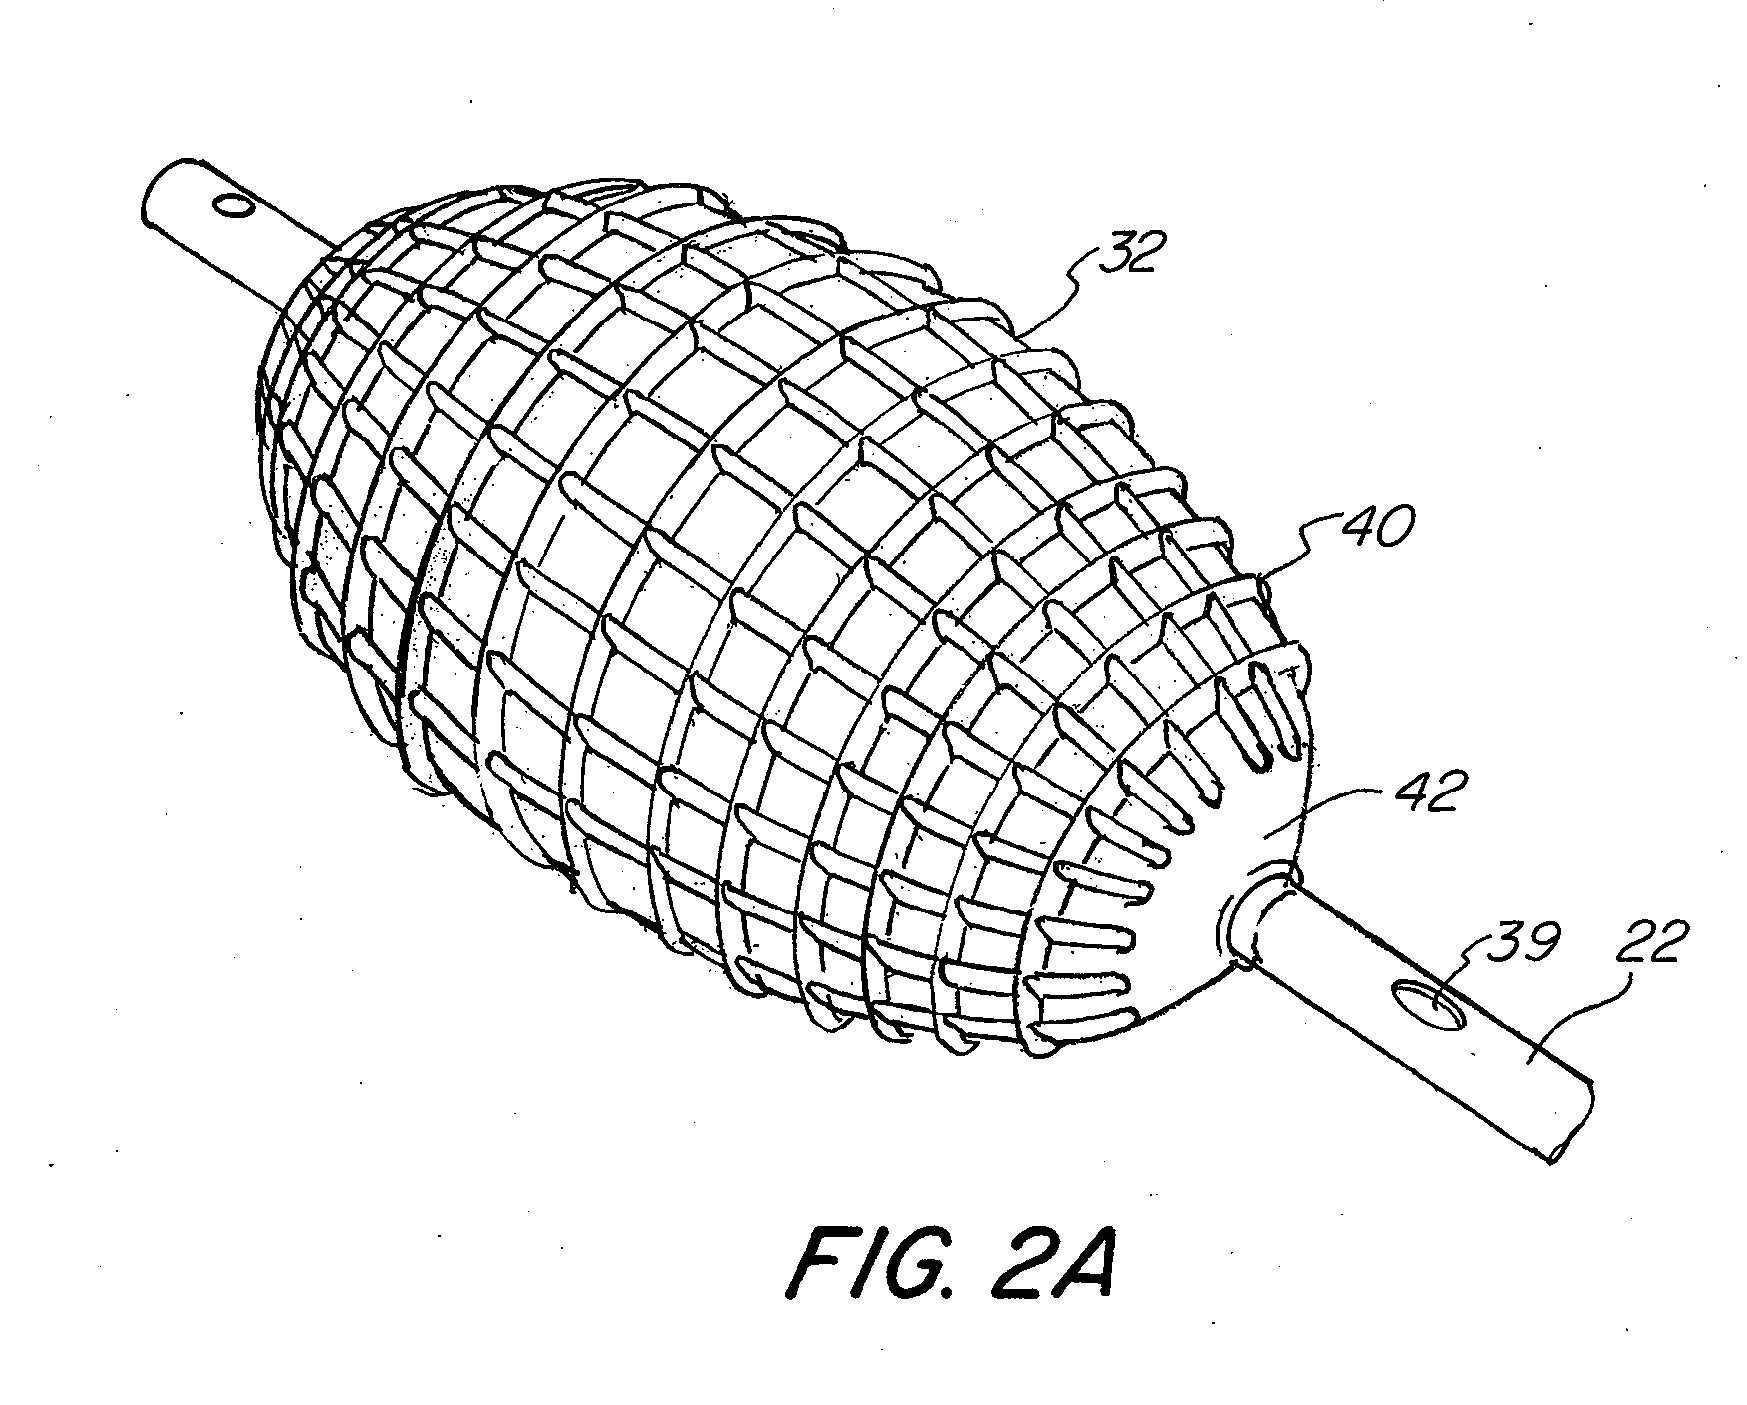 Abrading Balloon Catheter for Extravasated Drug Delivery